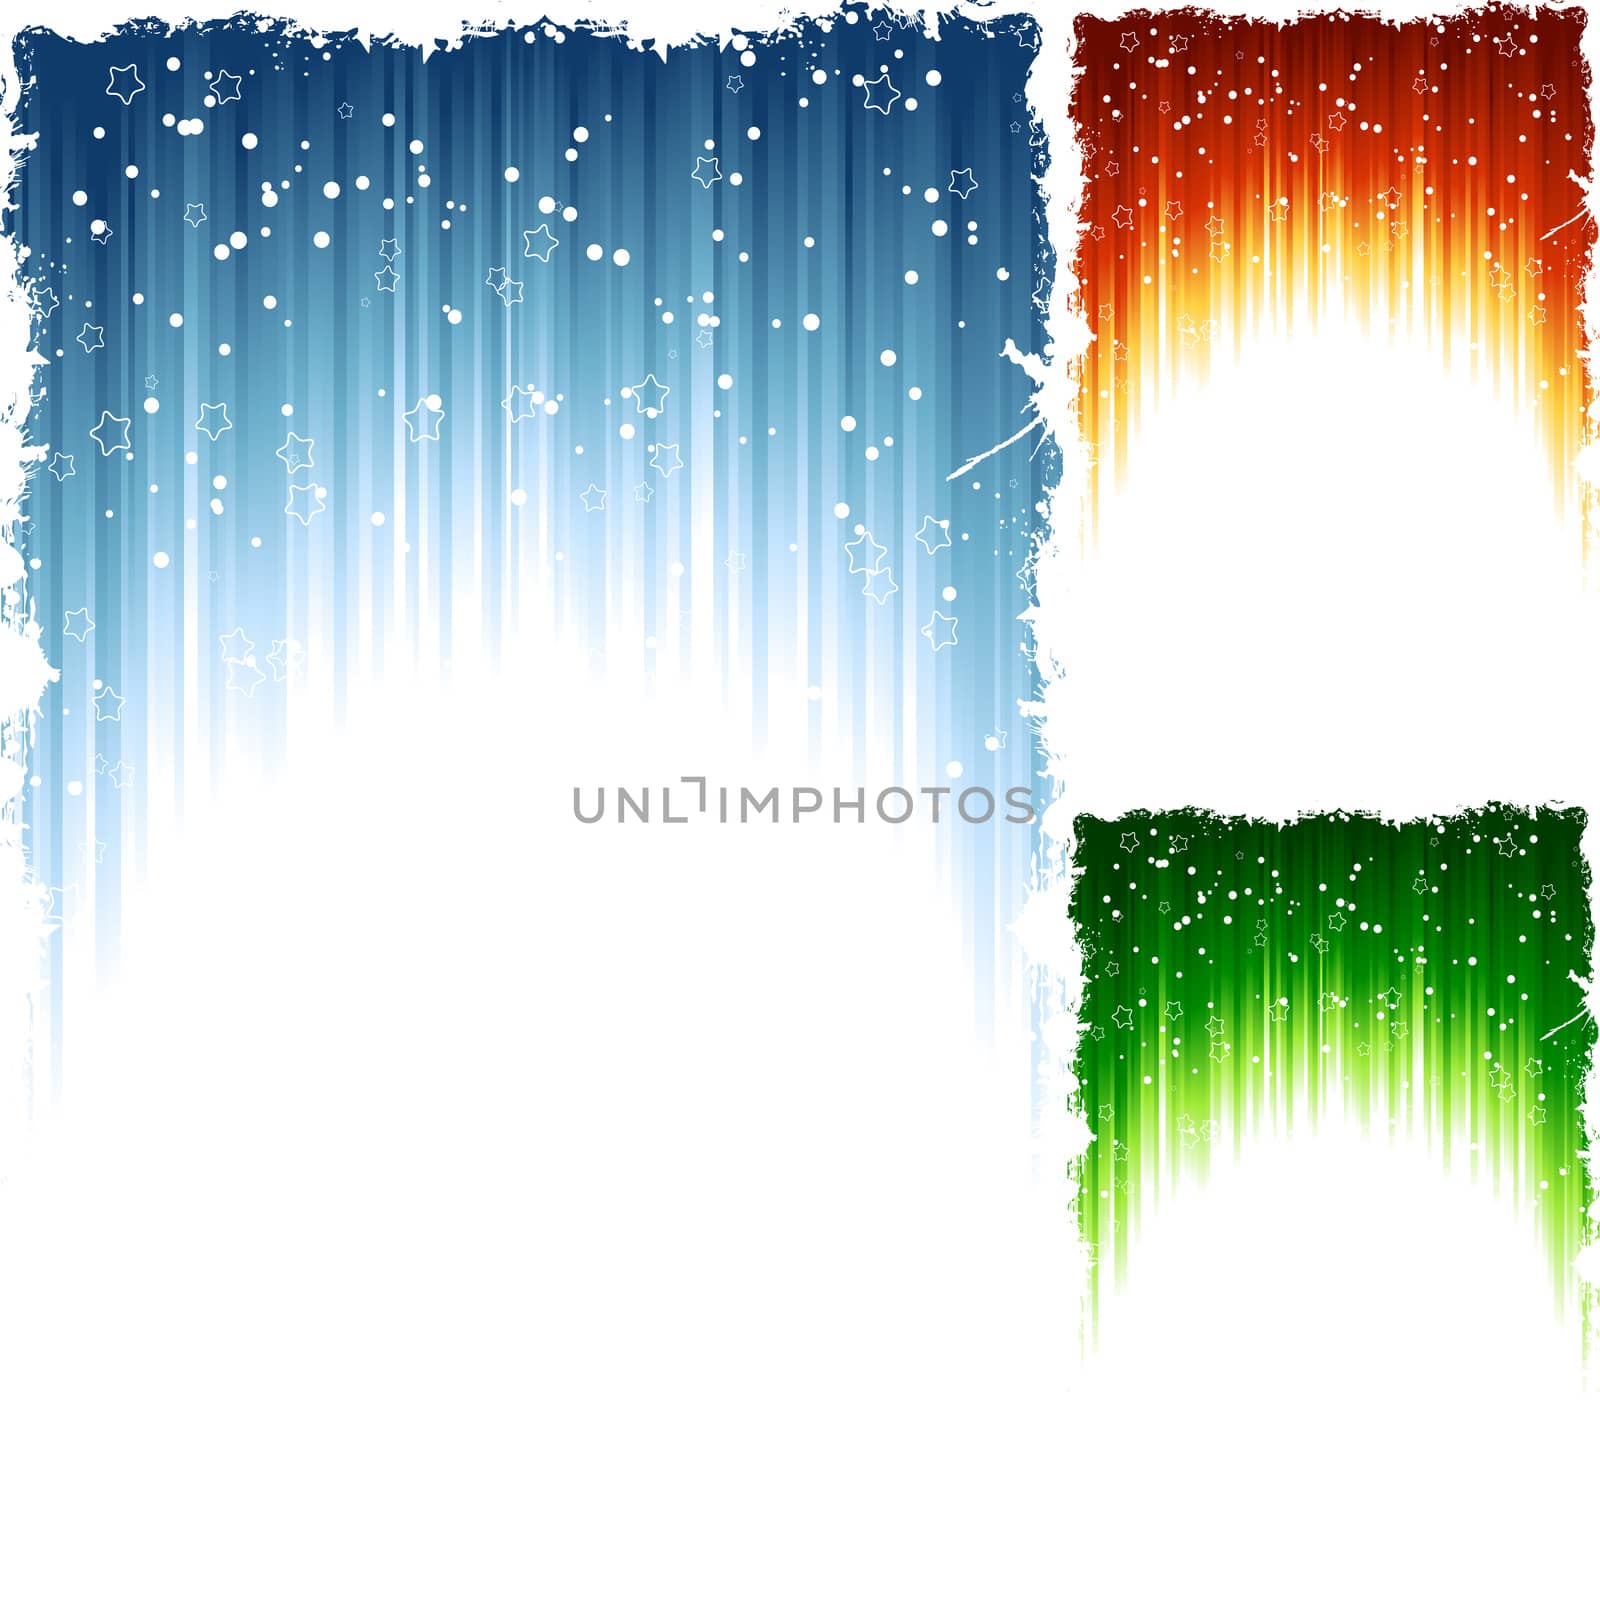 An abstract grunge winter background with lines and color gradients. 3 different color themes available.